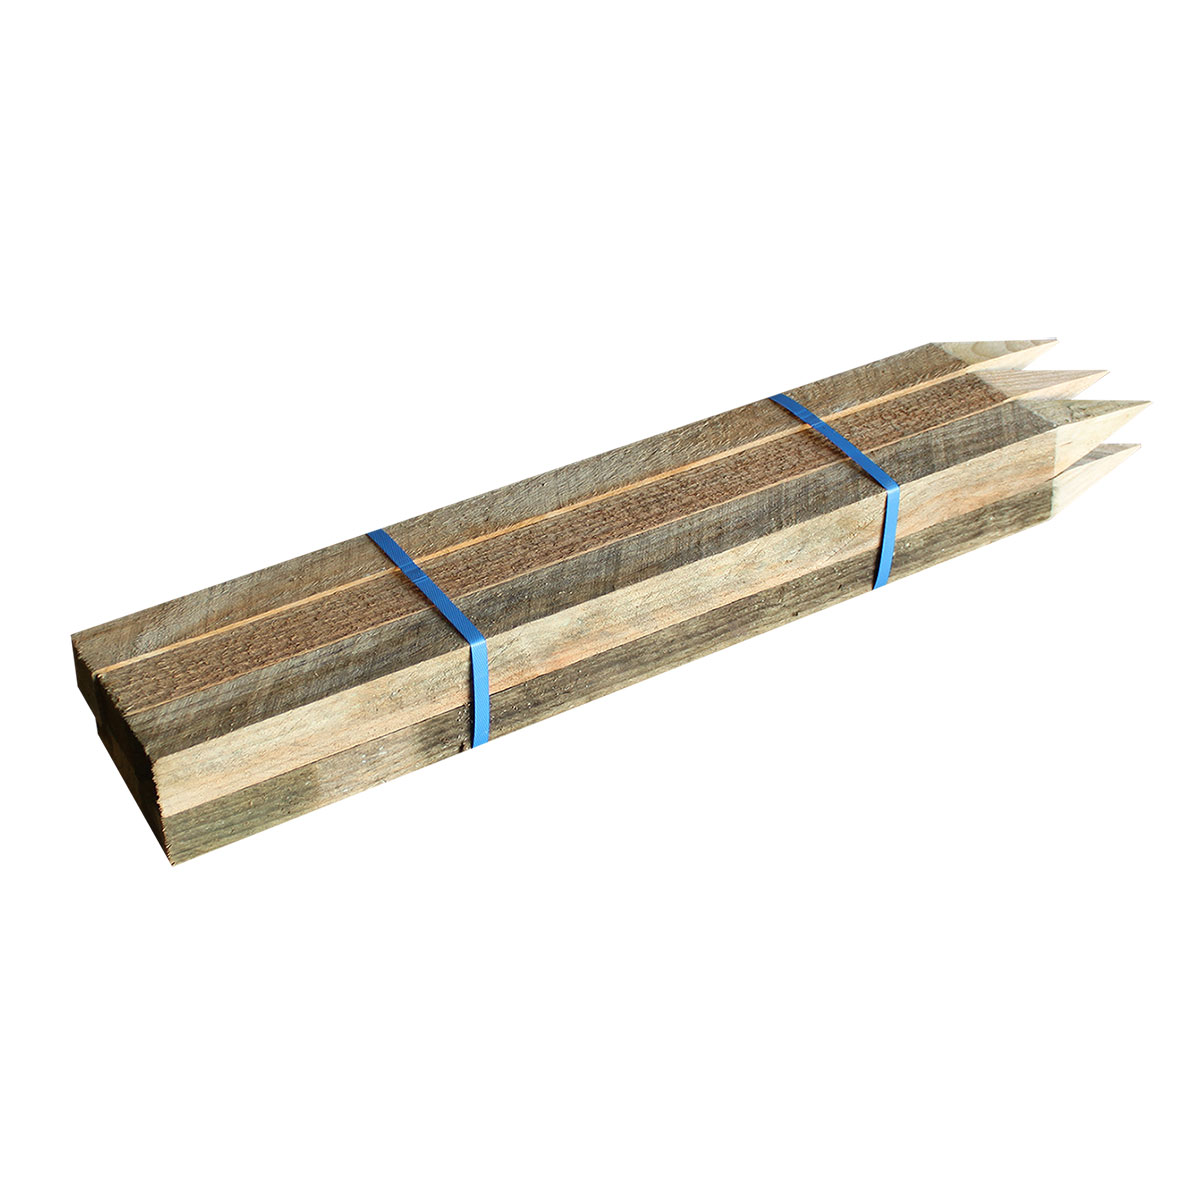 Treated Pine Pegs 50 x 50 x 900mm - 6 Pack